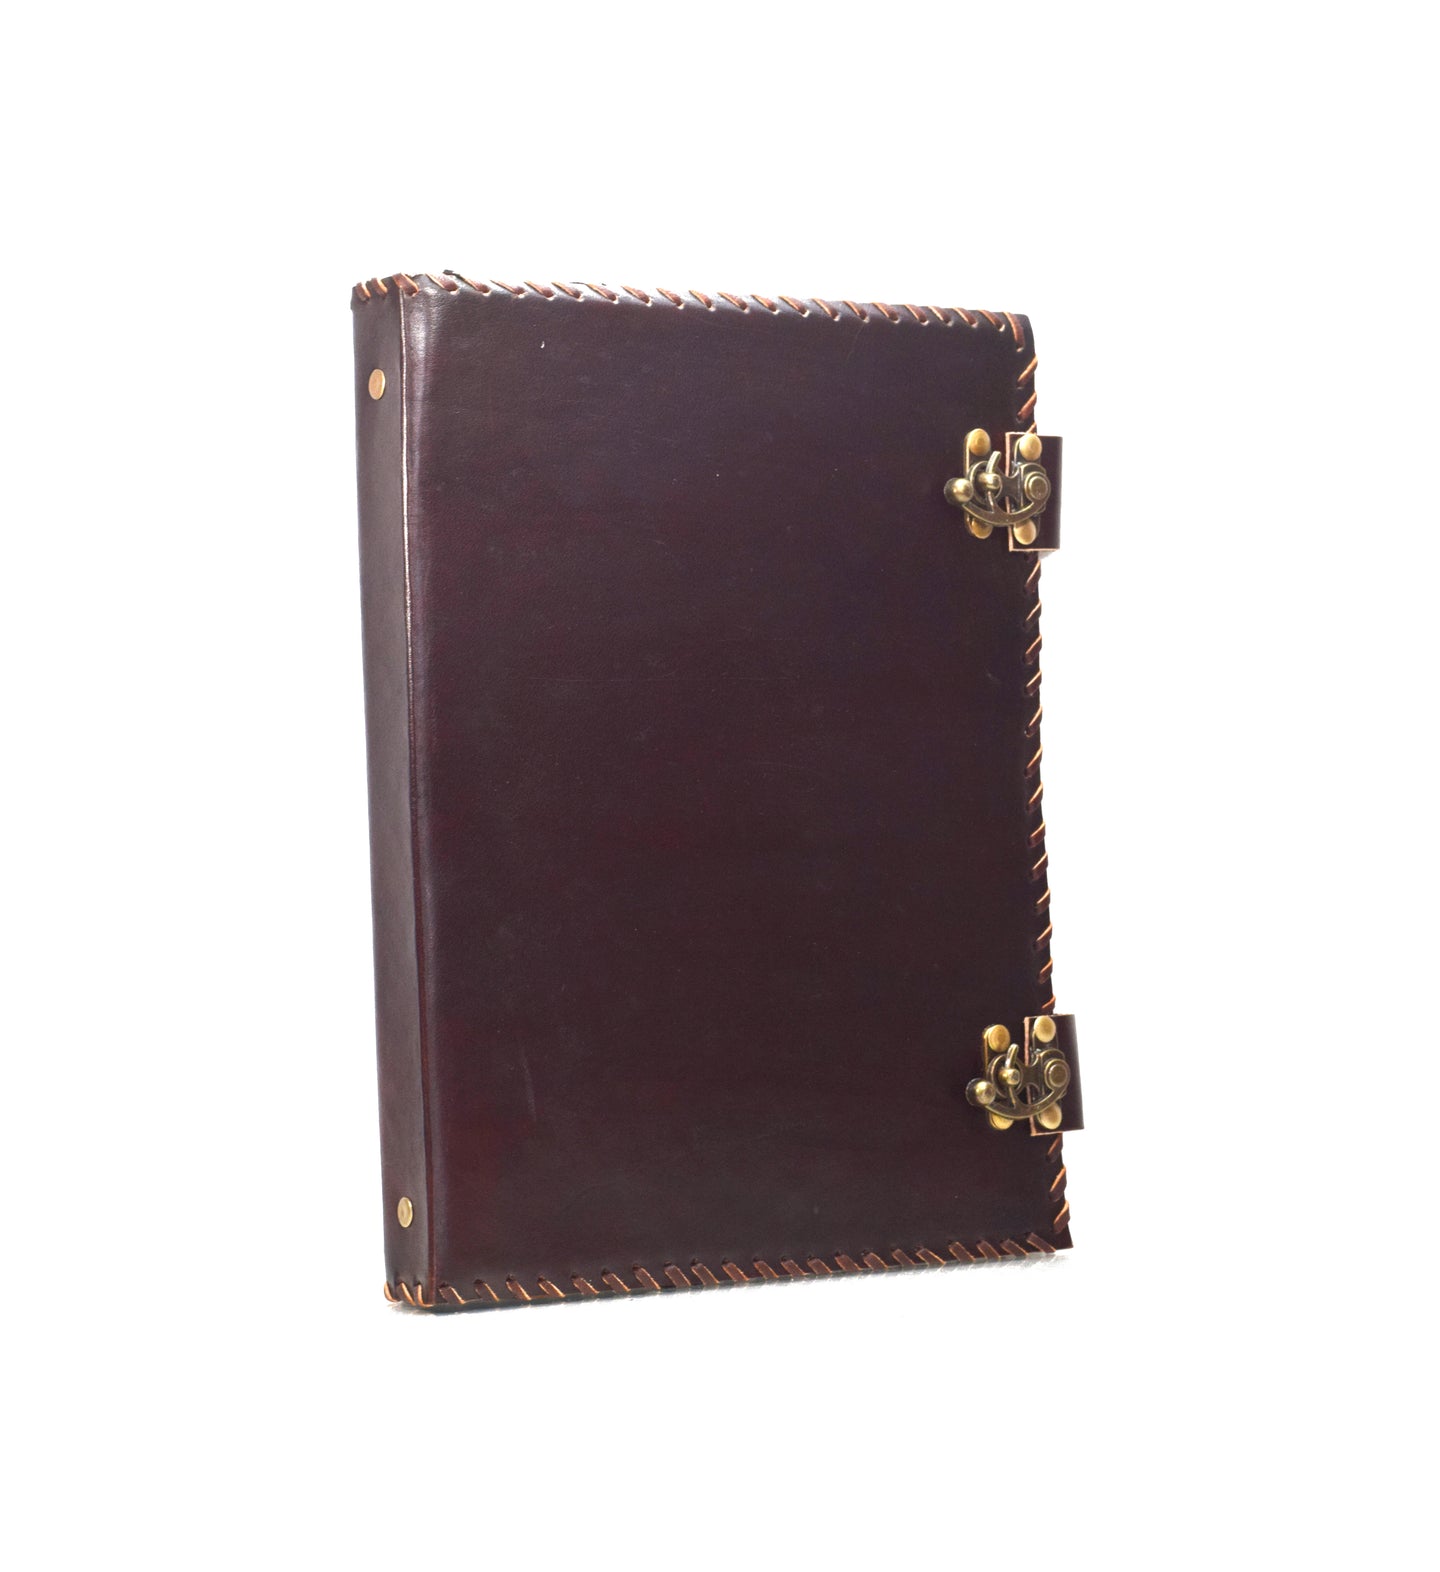 India Classic * Leather Binder 4 Rings DIN A4 Handmade India No Design Plain